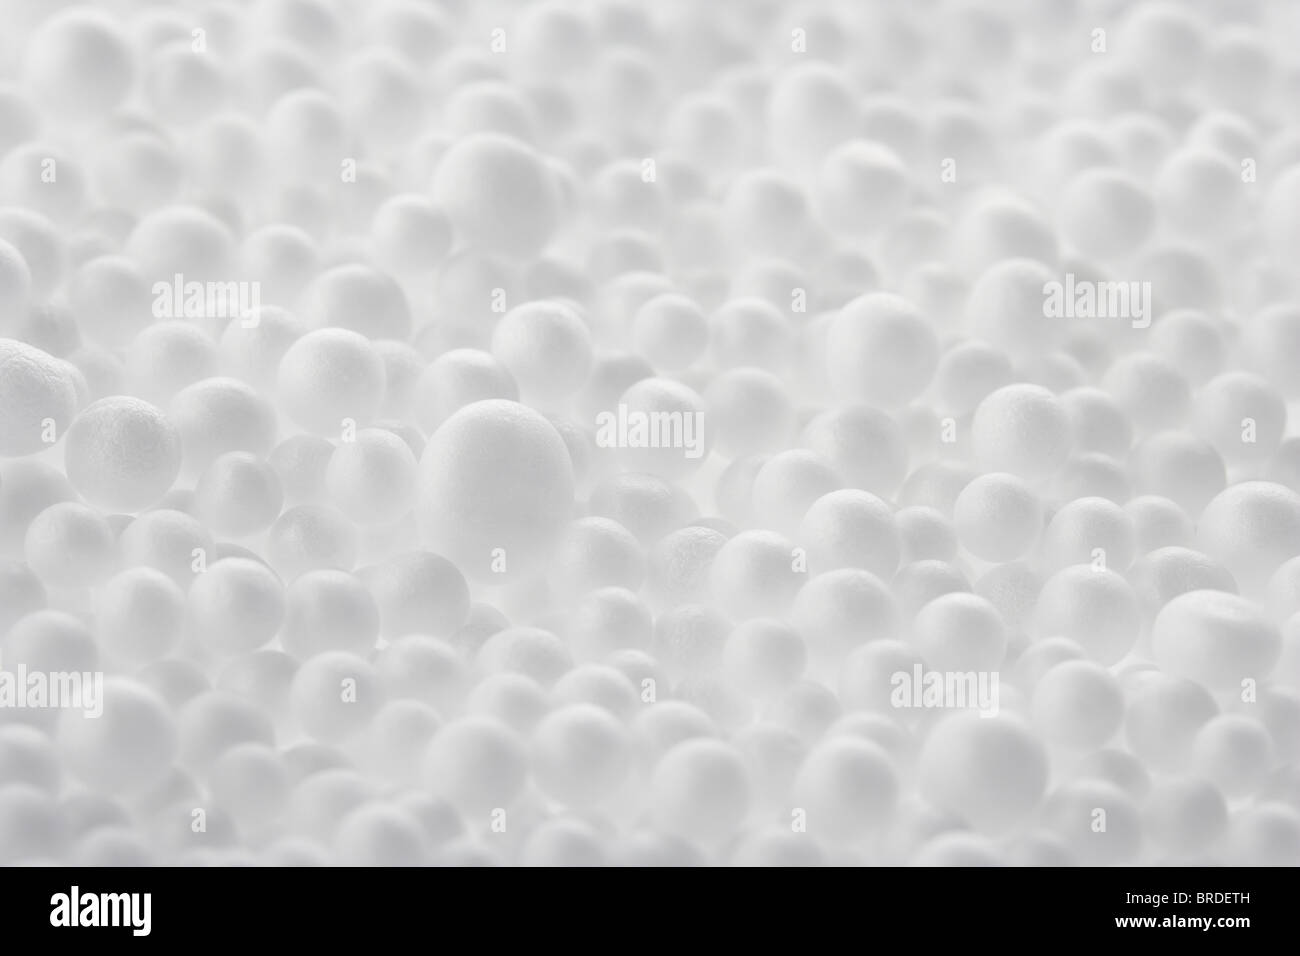 Polystyrene balls used as insulation and furniture packing filling Stock Photo